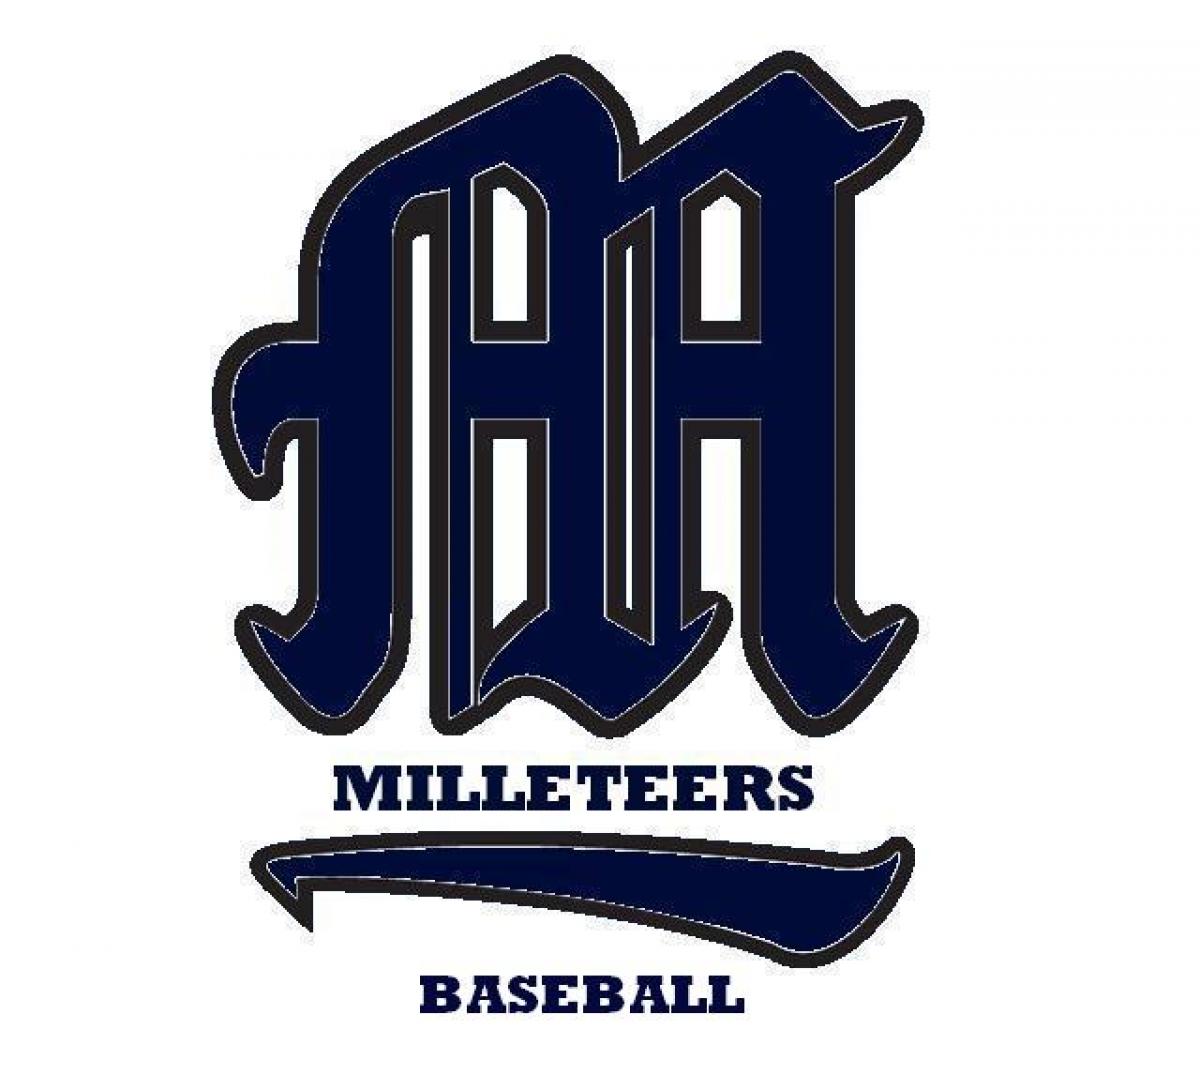 Milleteers Beat Up On Shorthanded Rebels